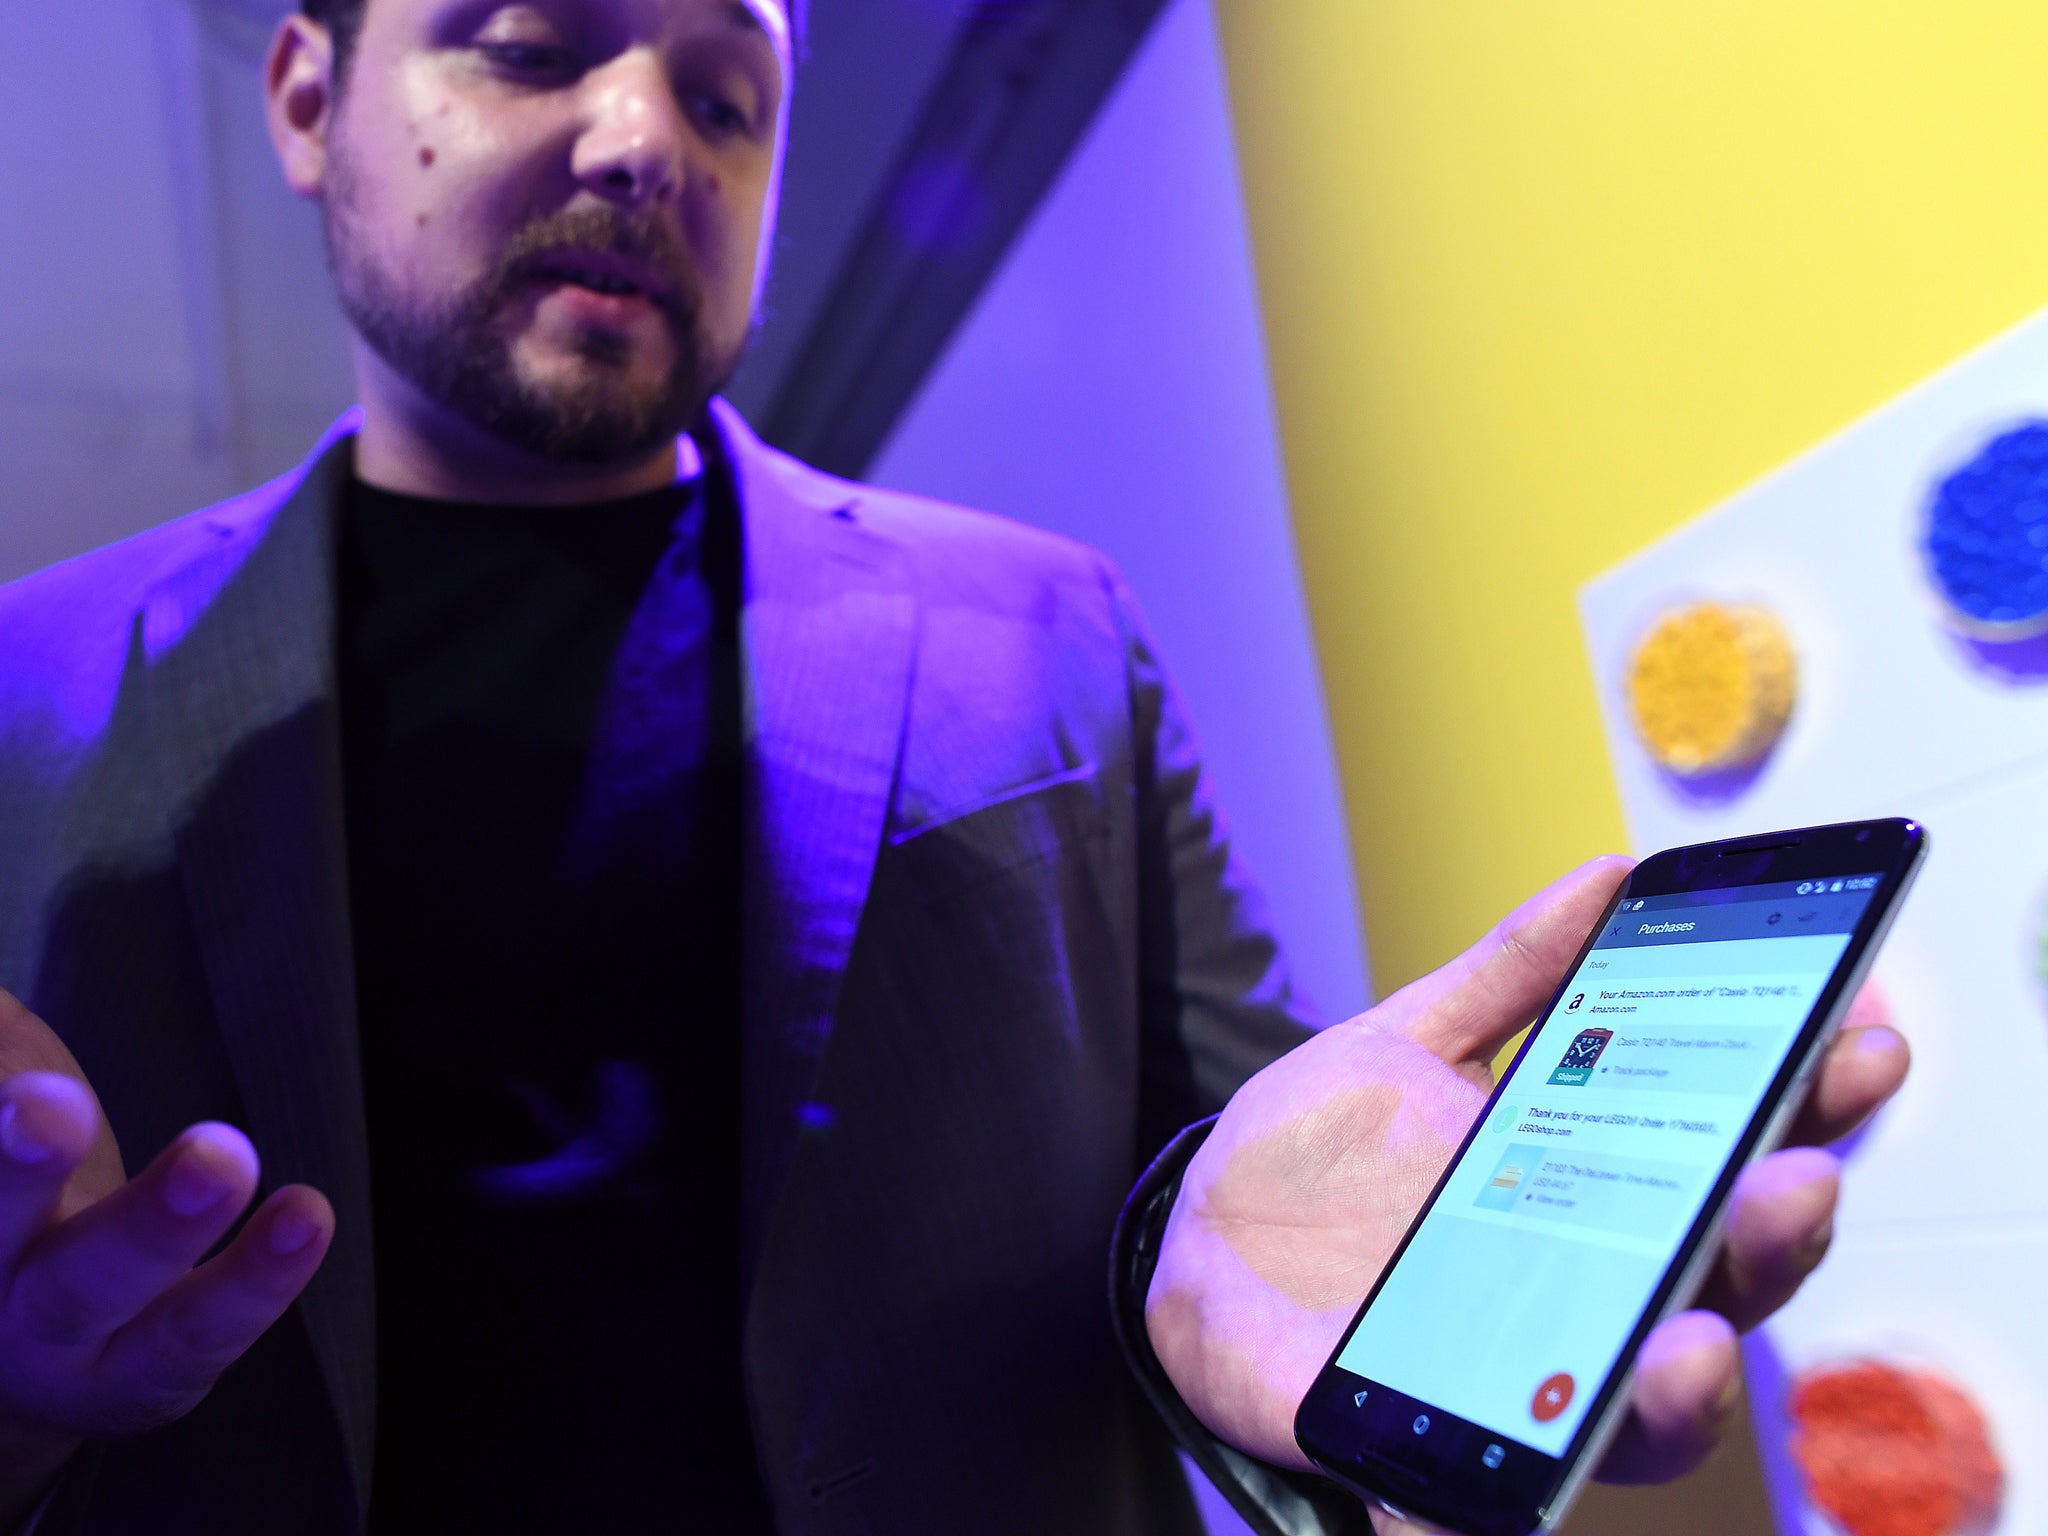 Google's lead designer for 'Inbox by Gmail' Jason Cornwell shows the app's functionalities on a nexus 6 android phone during a media preview in New York on October 29, 2014.